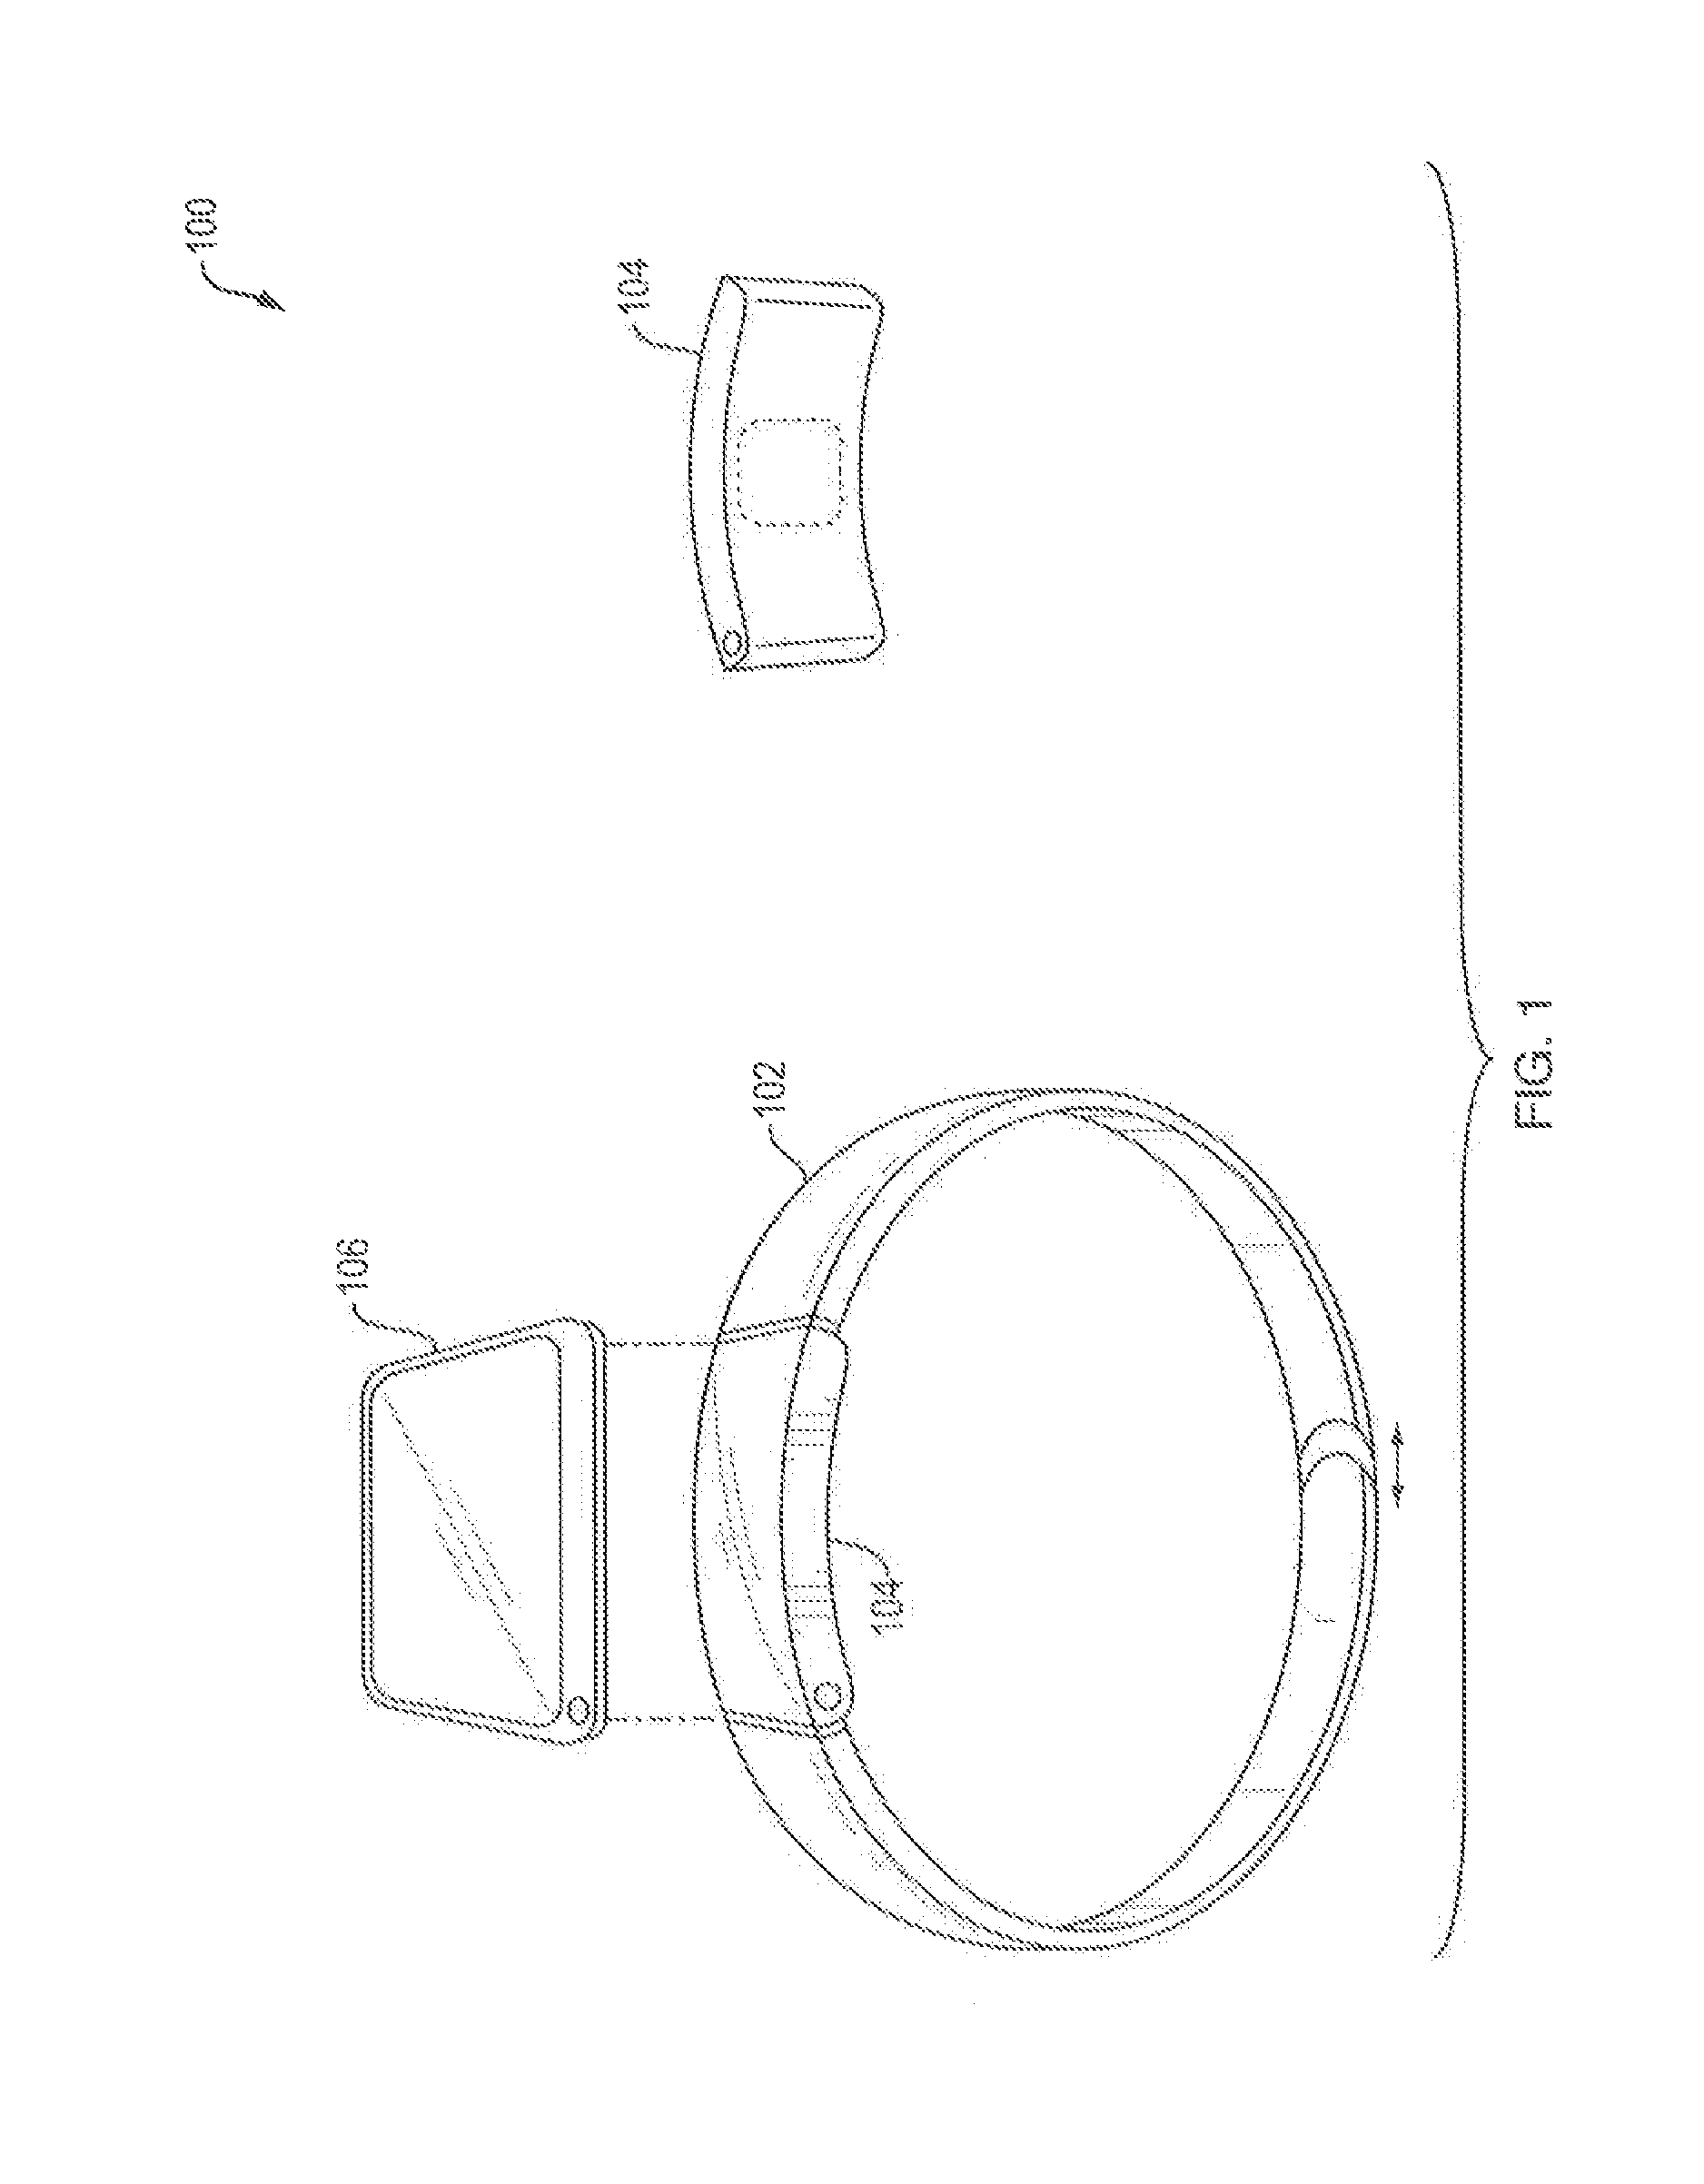 Systems, devices and methods for continuous heart rate monitoring and interpretation